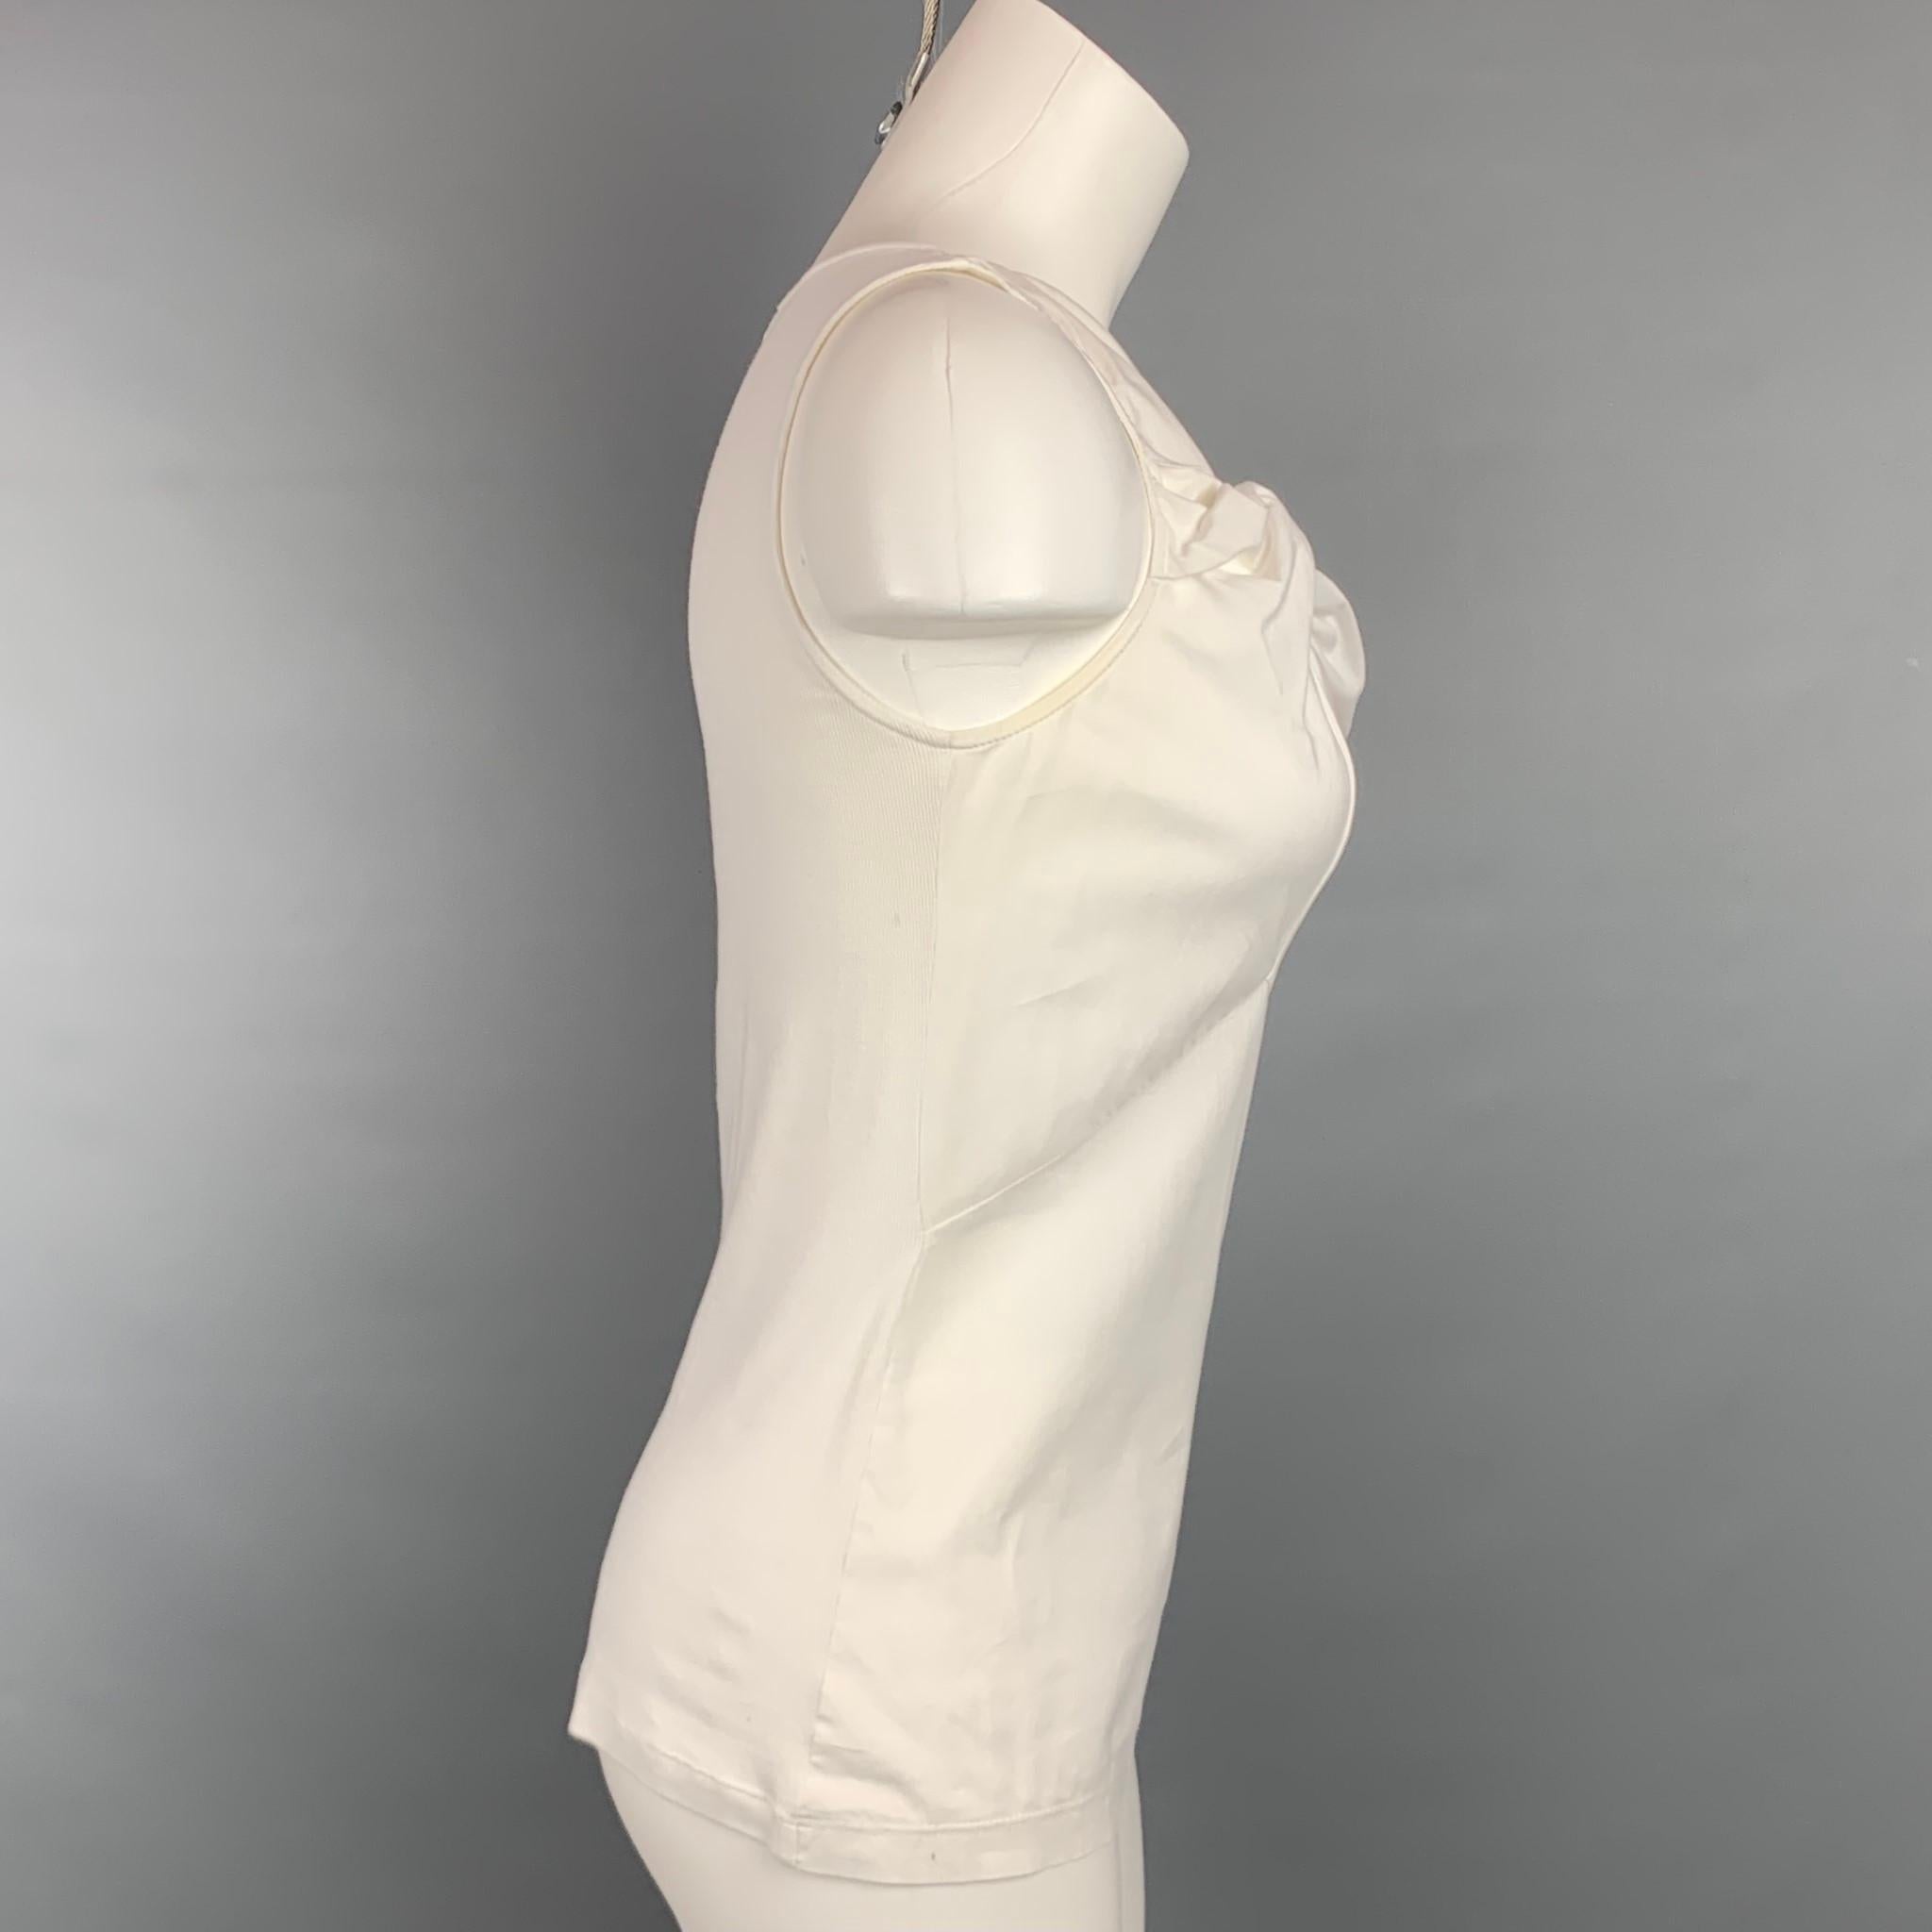 BRUNELLO CUCINELLI blouse comes in a white cotton / lycra featuring a sleeveless style and a knotted detail. Made in Italy.

Very Good Pre-Owned Condition.
Marked: S

Measurements:

Bust: 32 in.
Length: 21 in.